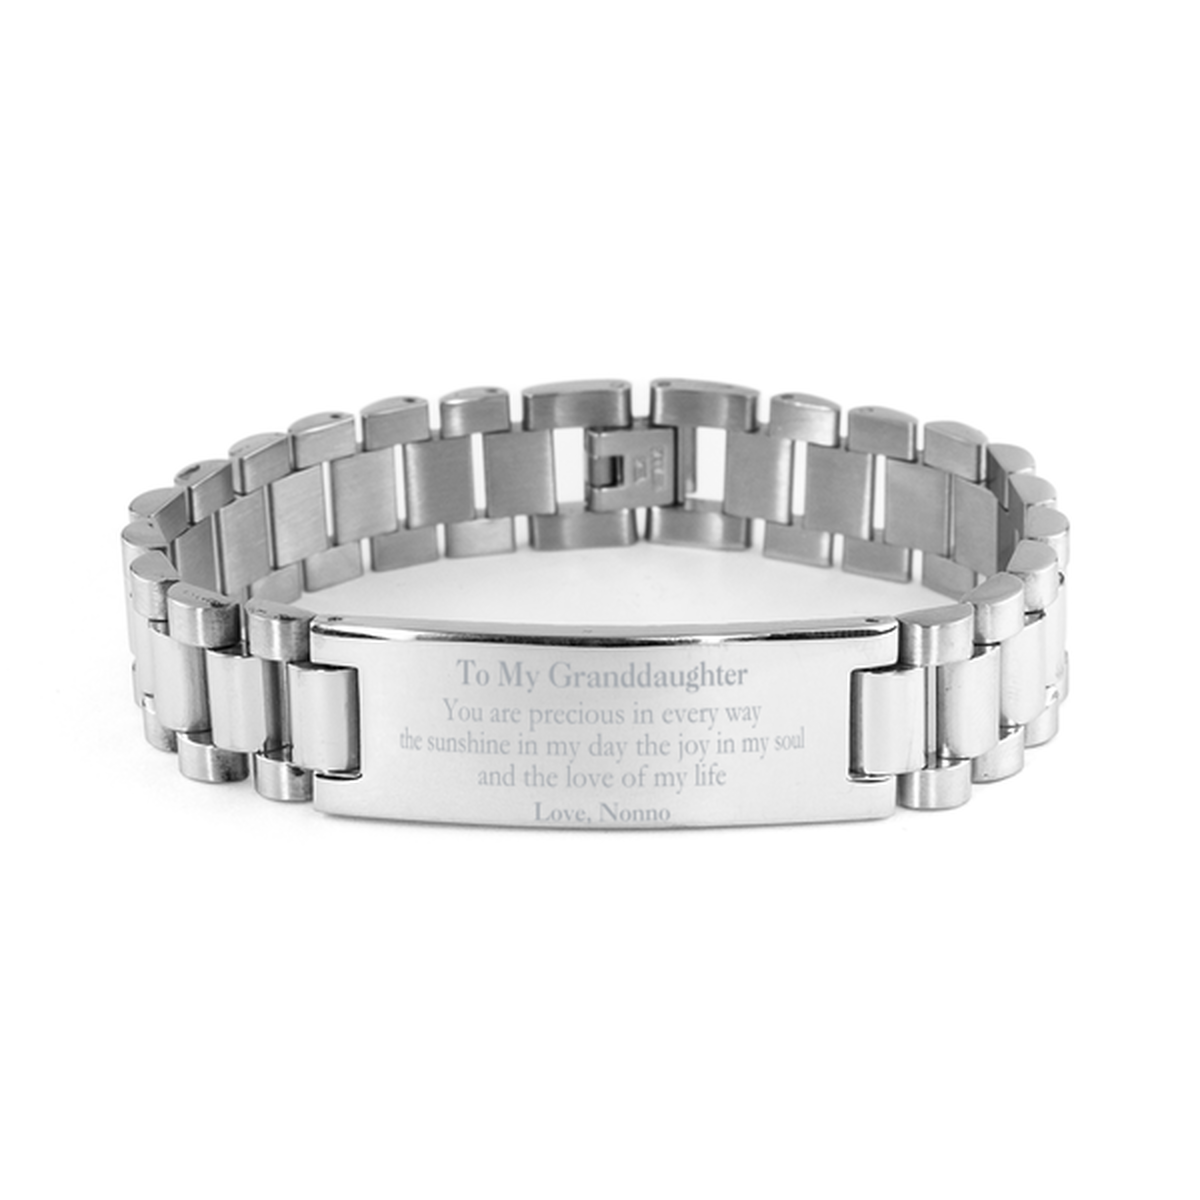 Graduation Gifts for Granddaughter Ladder Stainless Steel Bracelet Present from Nonno, Christmas Granddaughter Birthday Gifts Granddaughter You are precious in every way the sunshine in my day. Love, Nonno